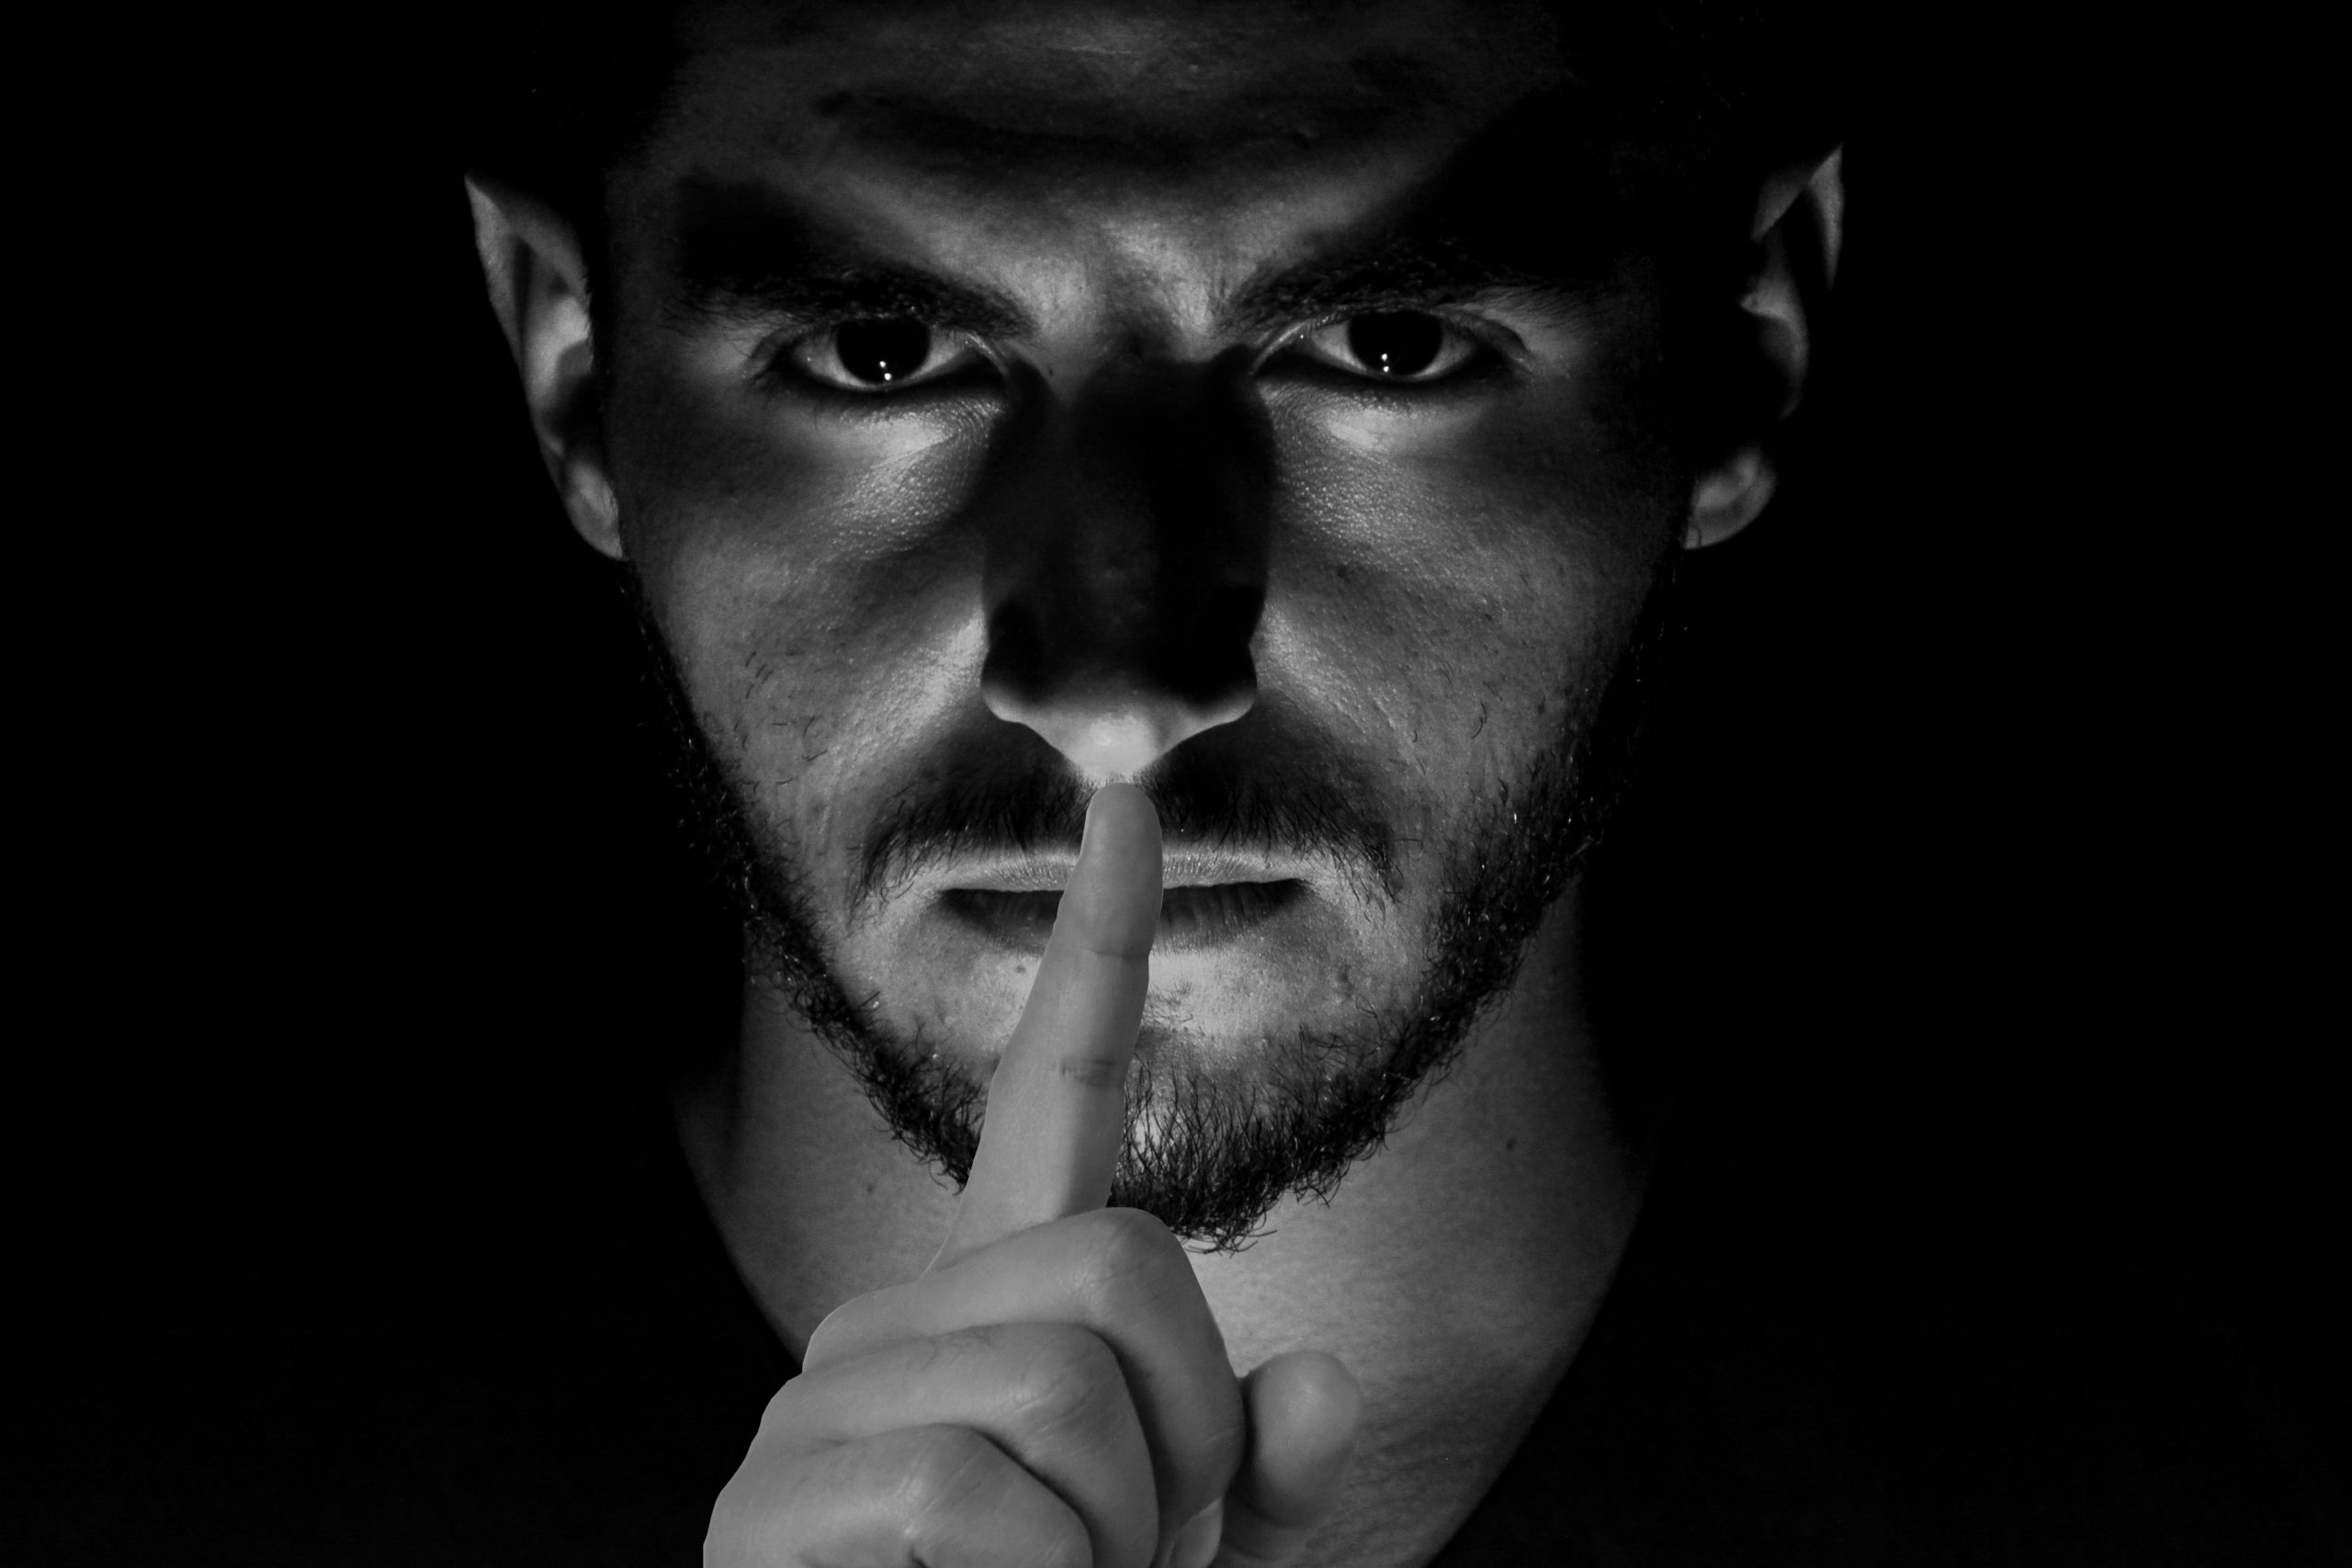 Machiavellian And Psychopathic Personality Traits Linked To Belief In